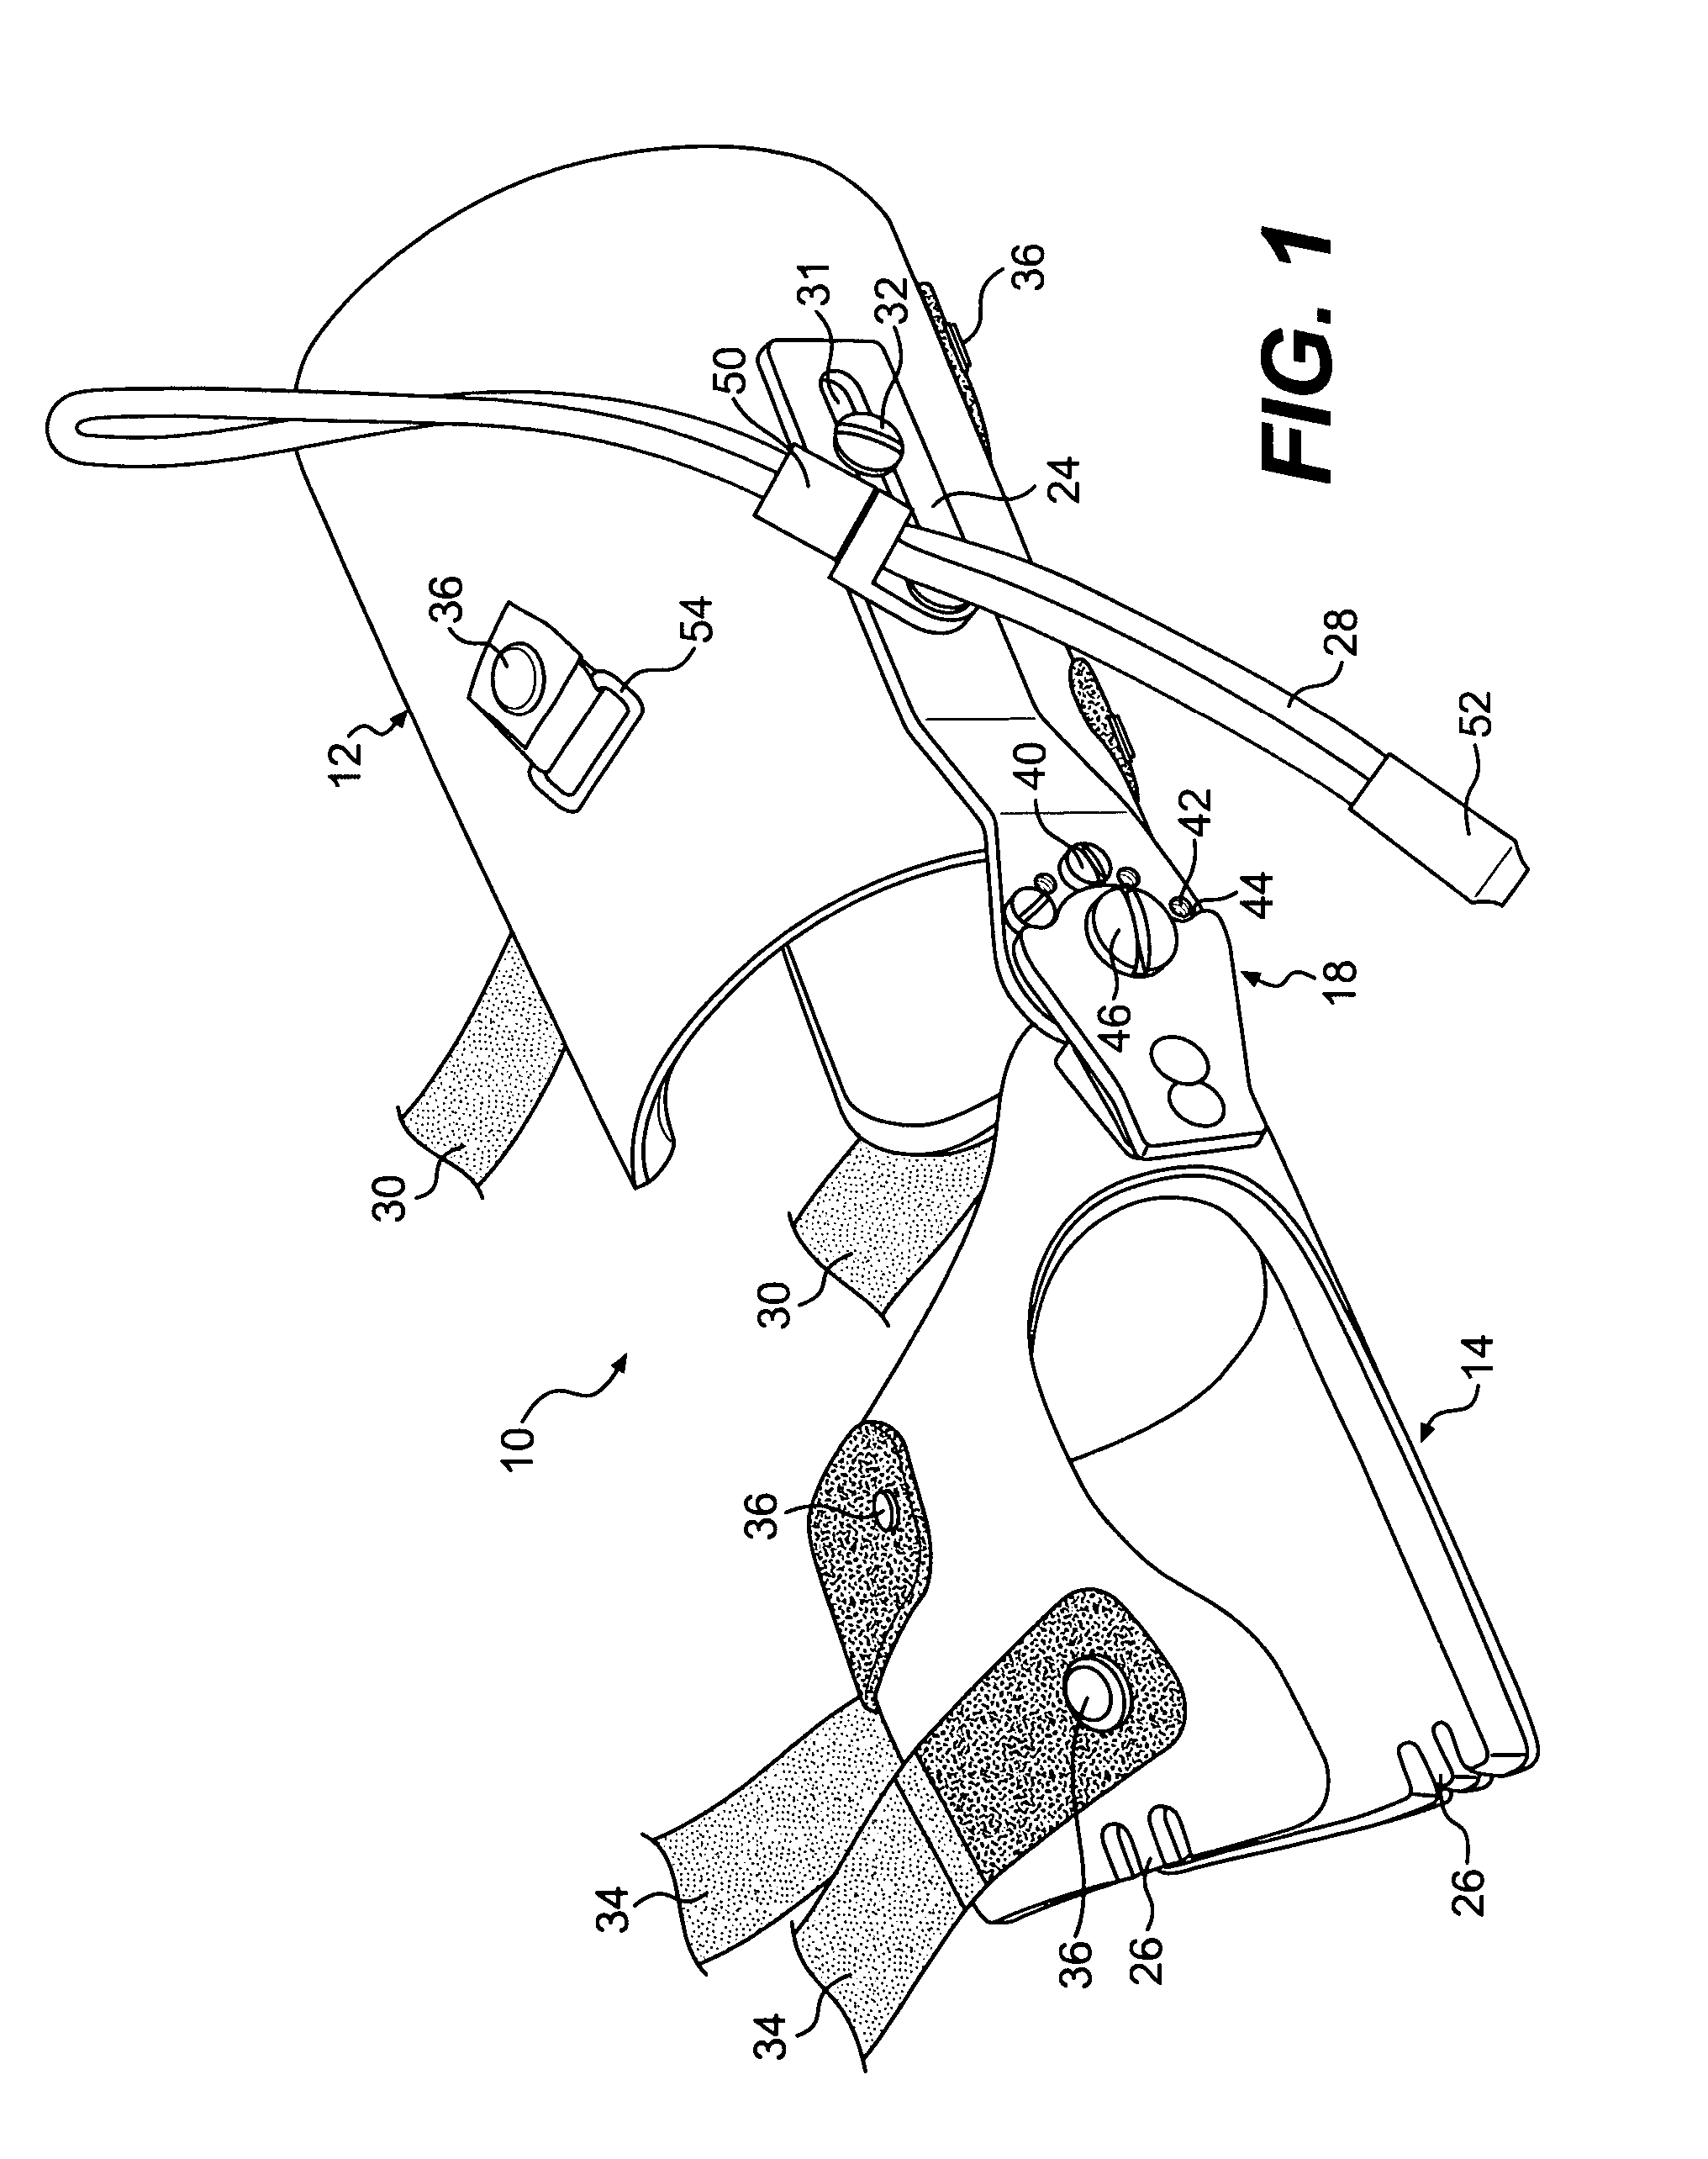 Flexion and extension device